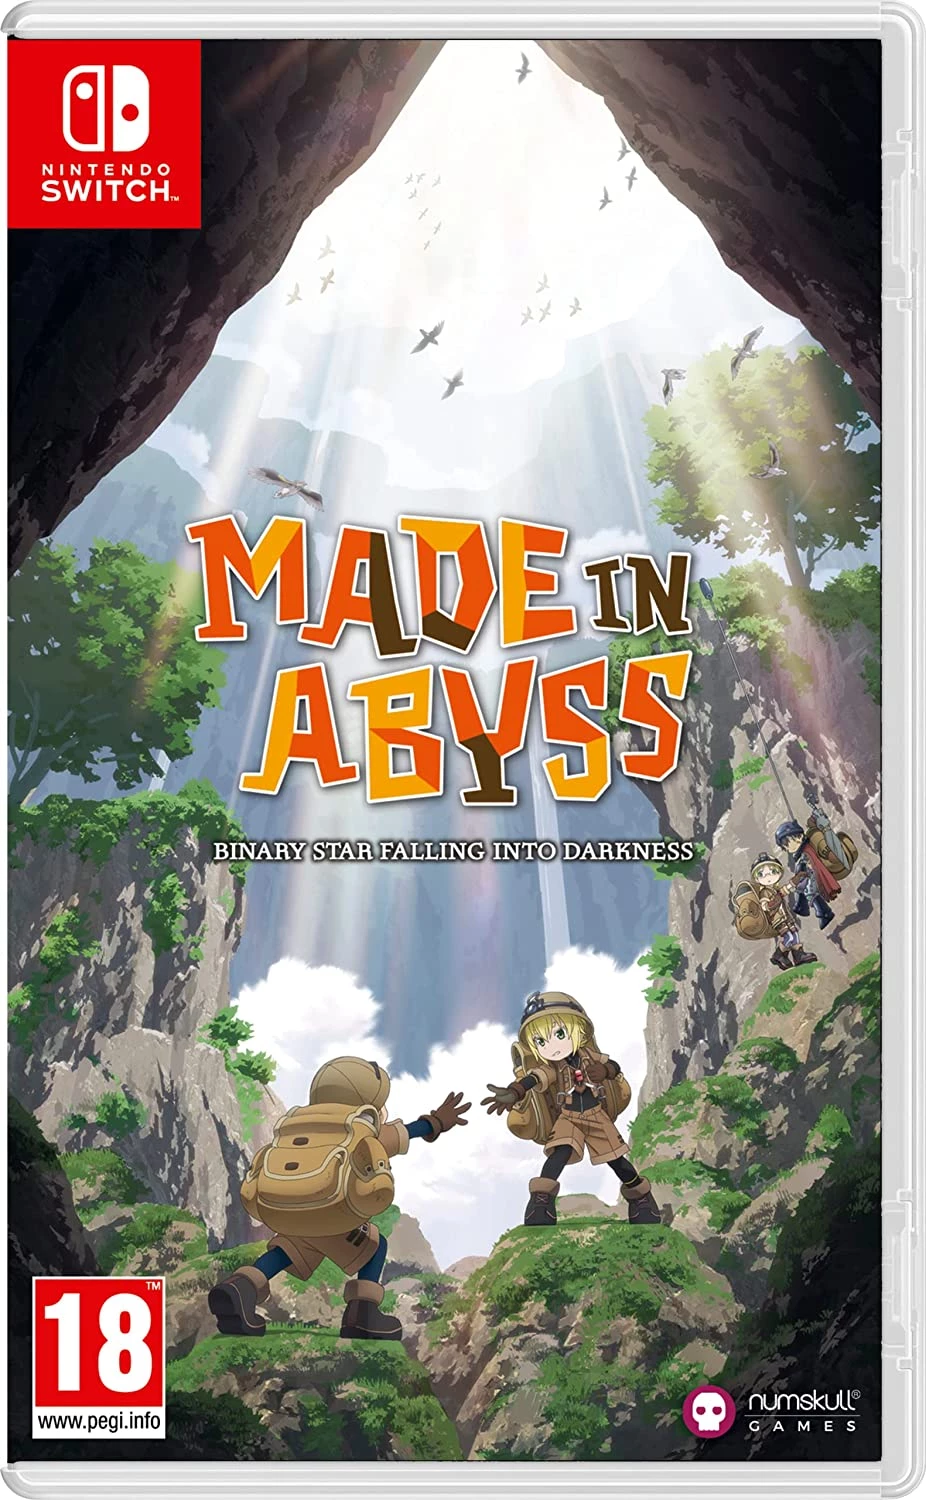 Made in Abyss: Binary Star Falling into Darkness (Switch), Chime Corporation